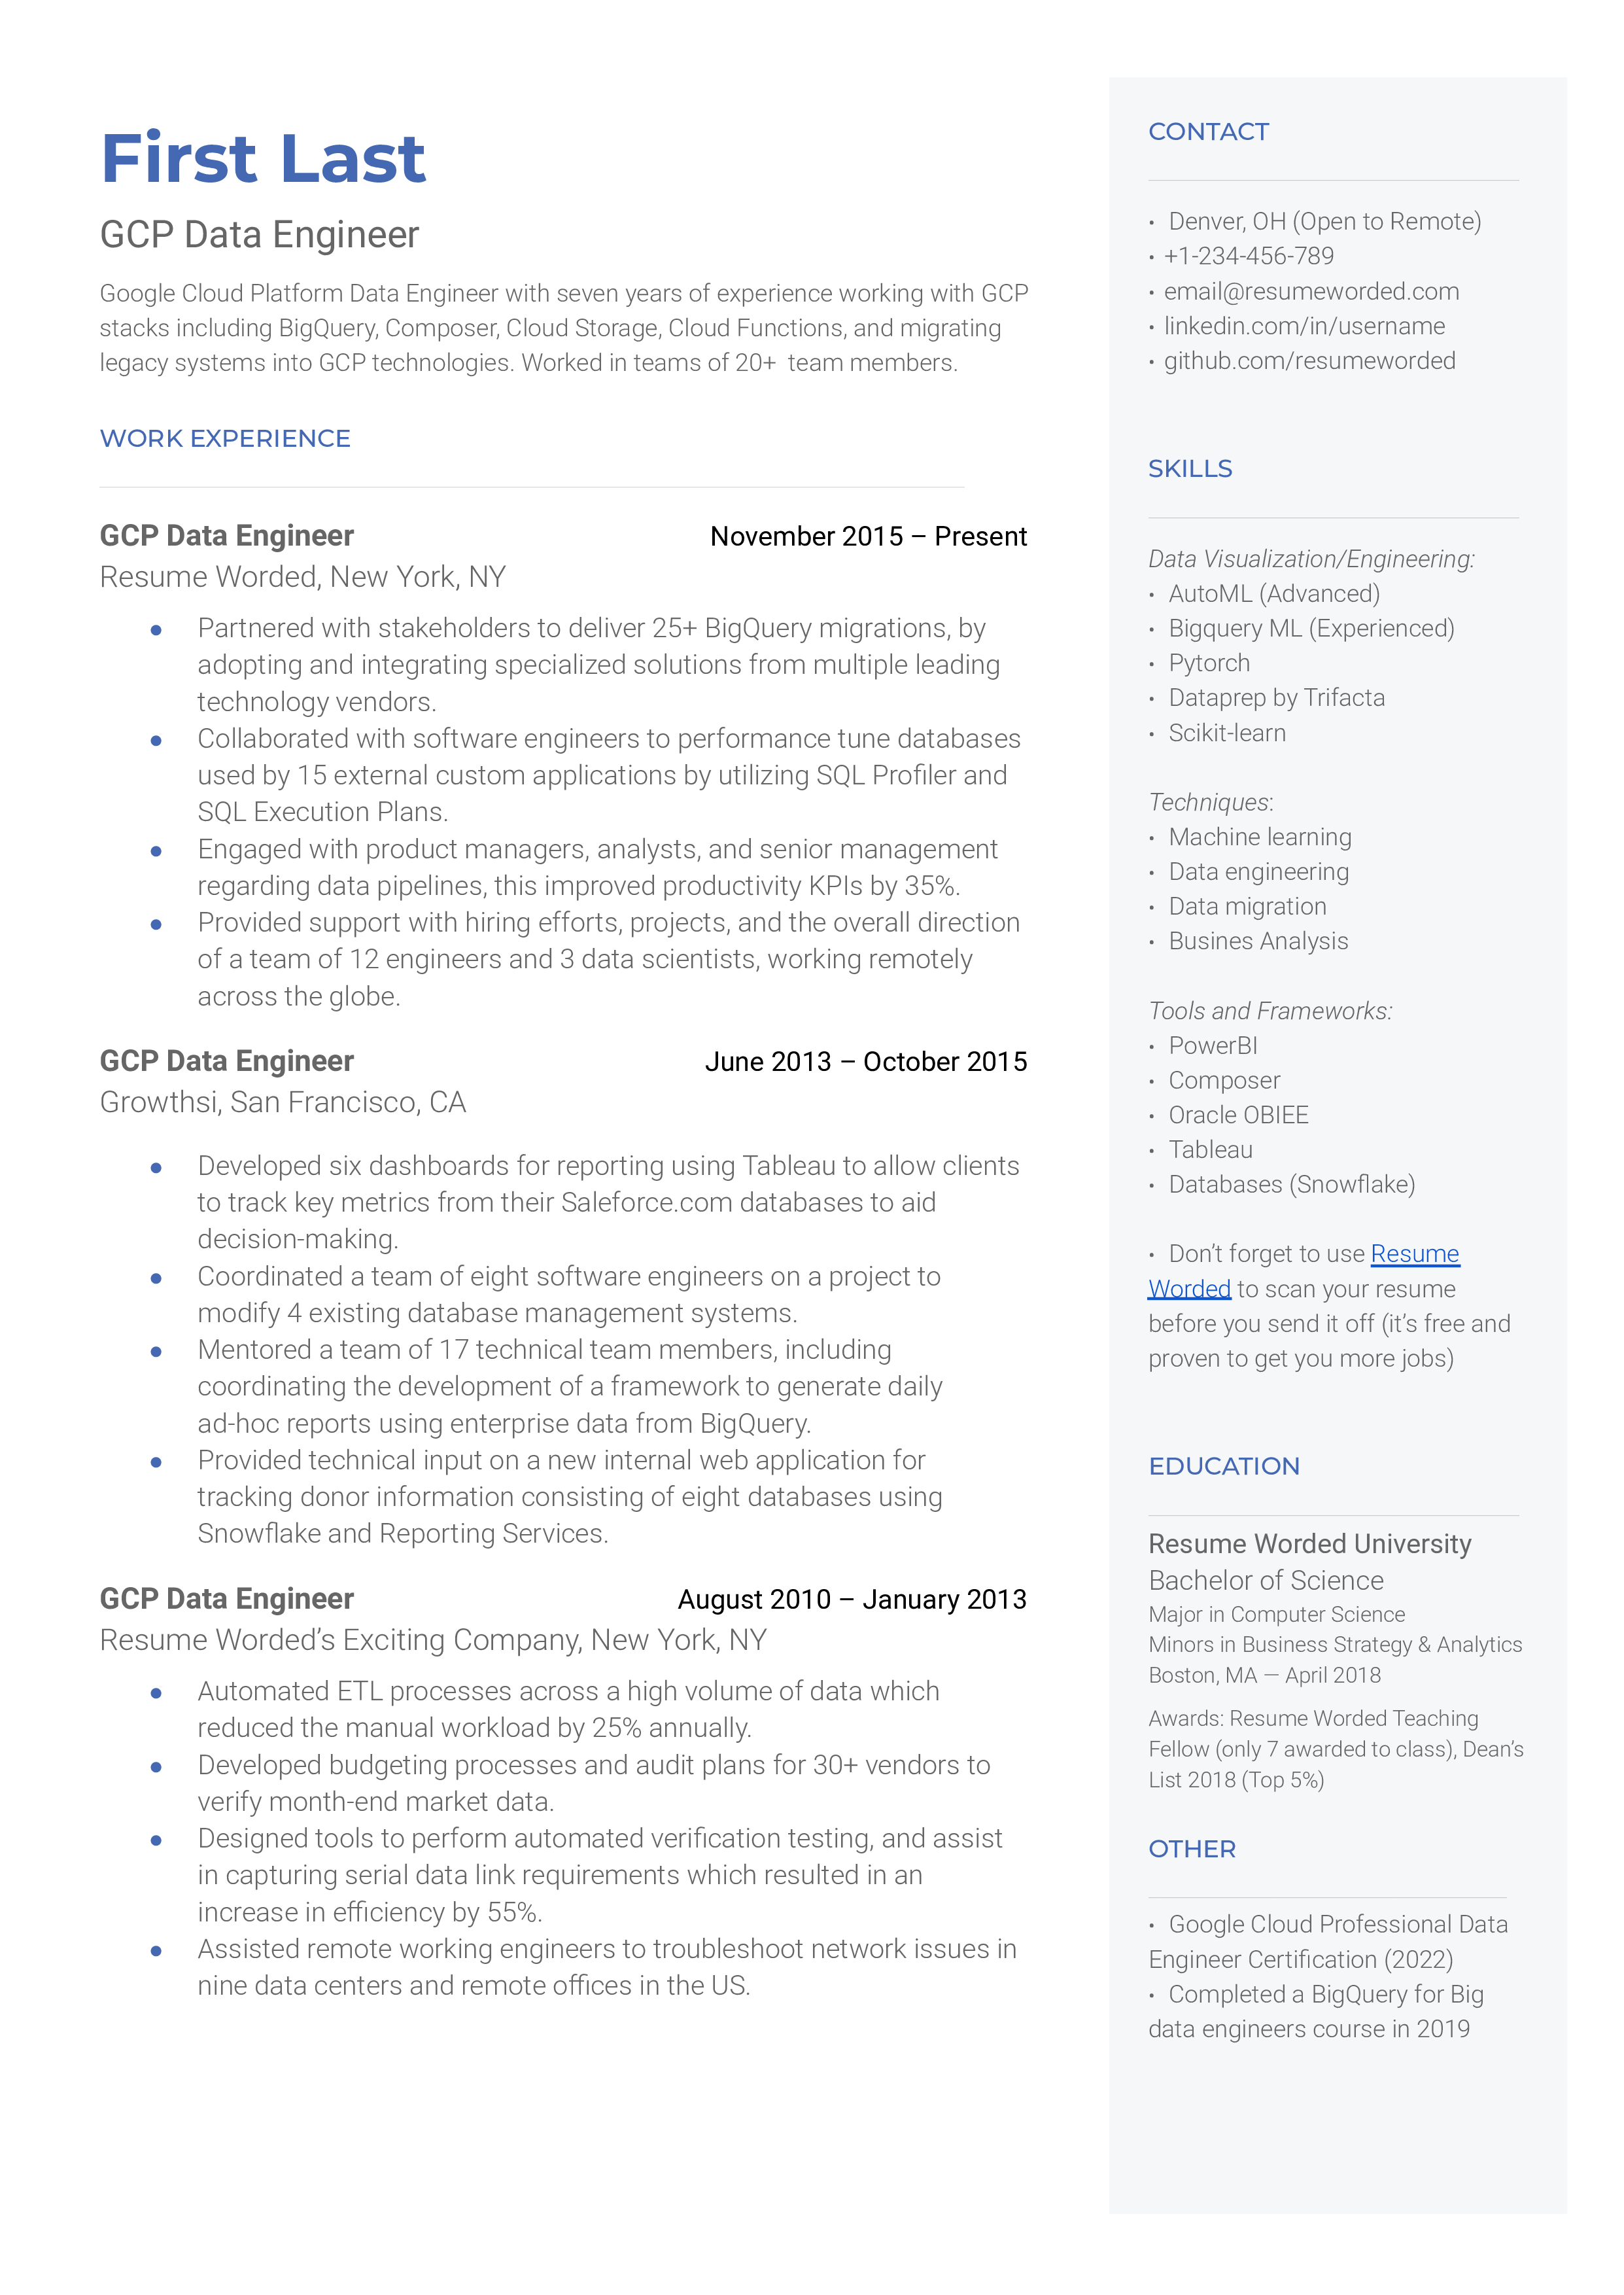 Screenshot of a CV for a GCP Data Engineer role, detailing experience with Google Cloud Platform tools and data engineering competencies.